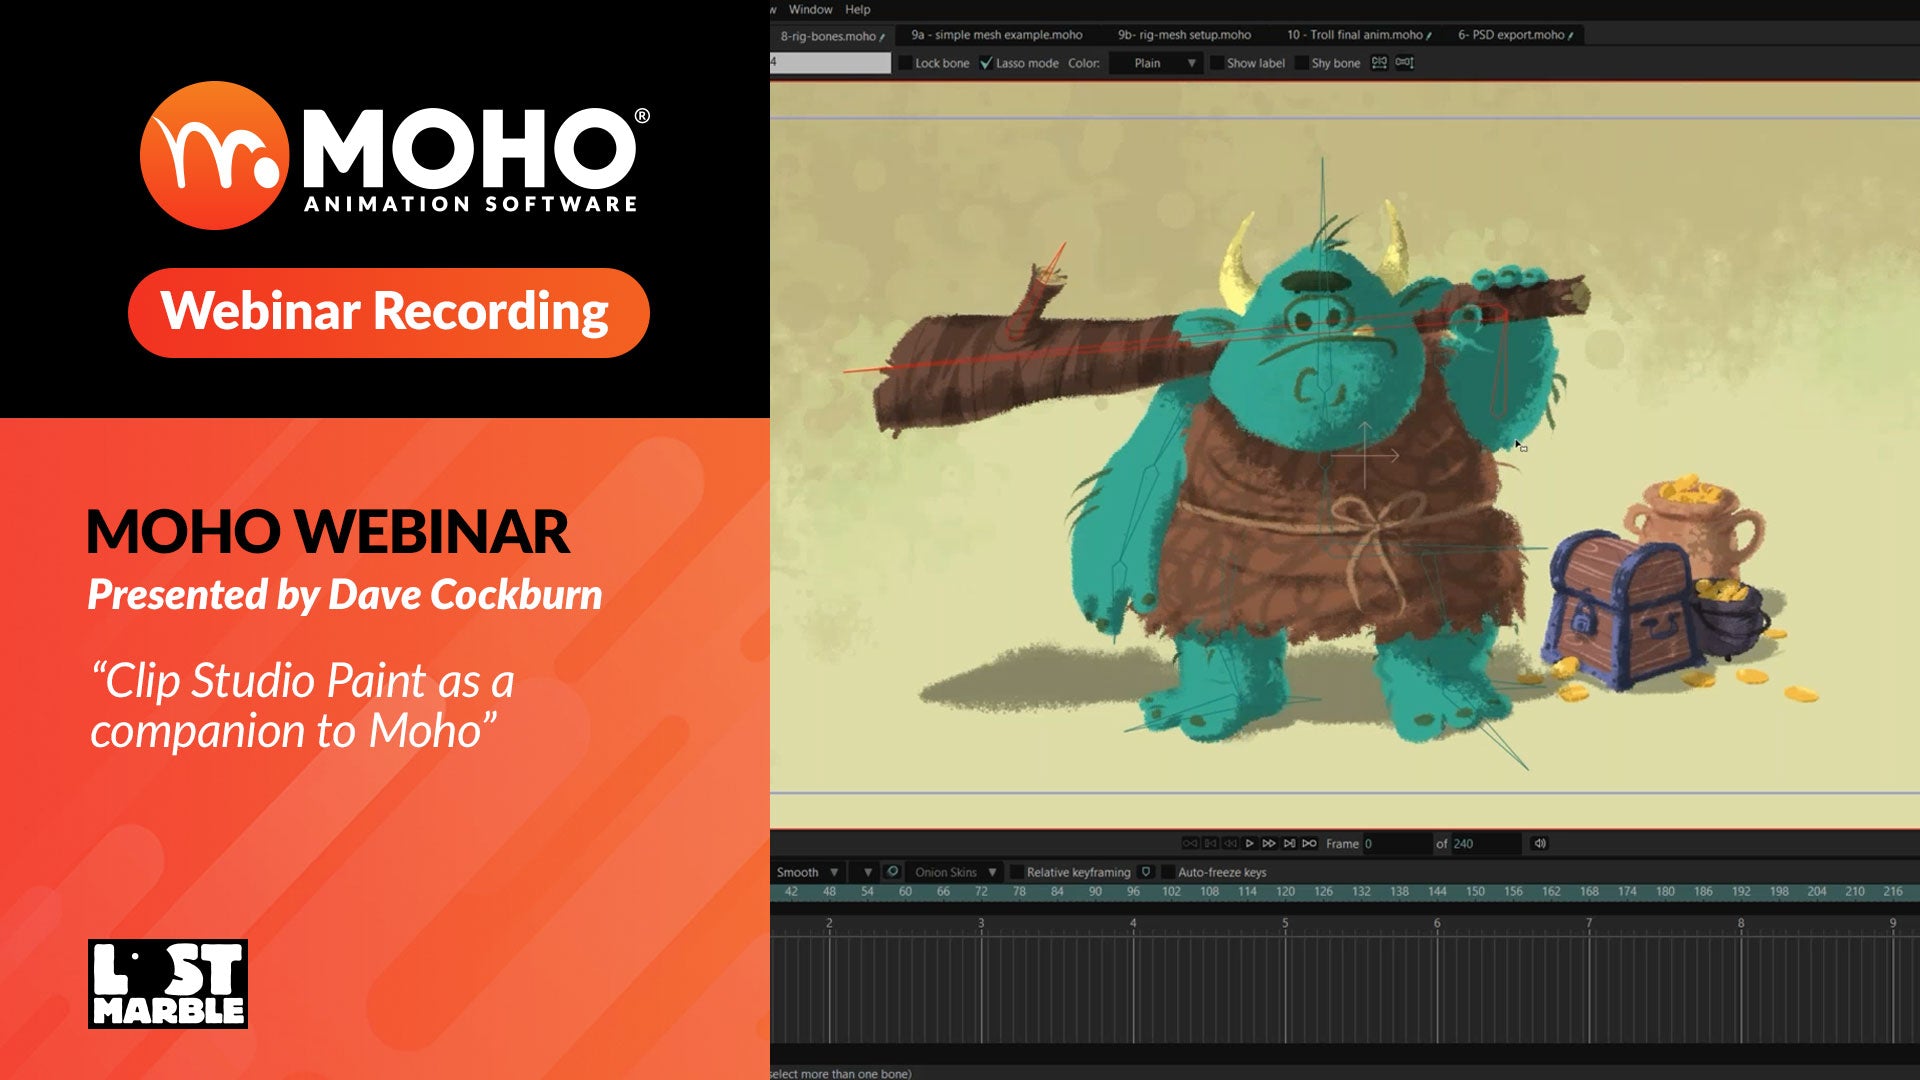 Webinar recording: Clip Studio Paint as a companion to Moho with Dave Cockburn